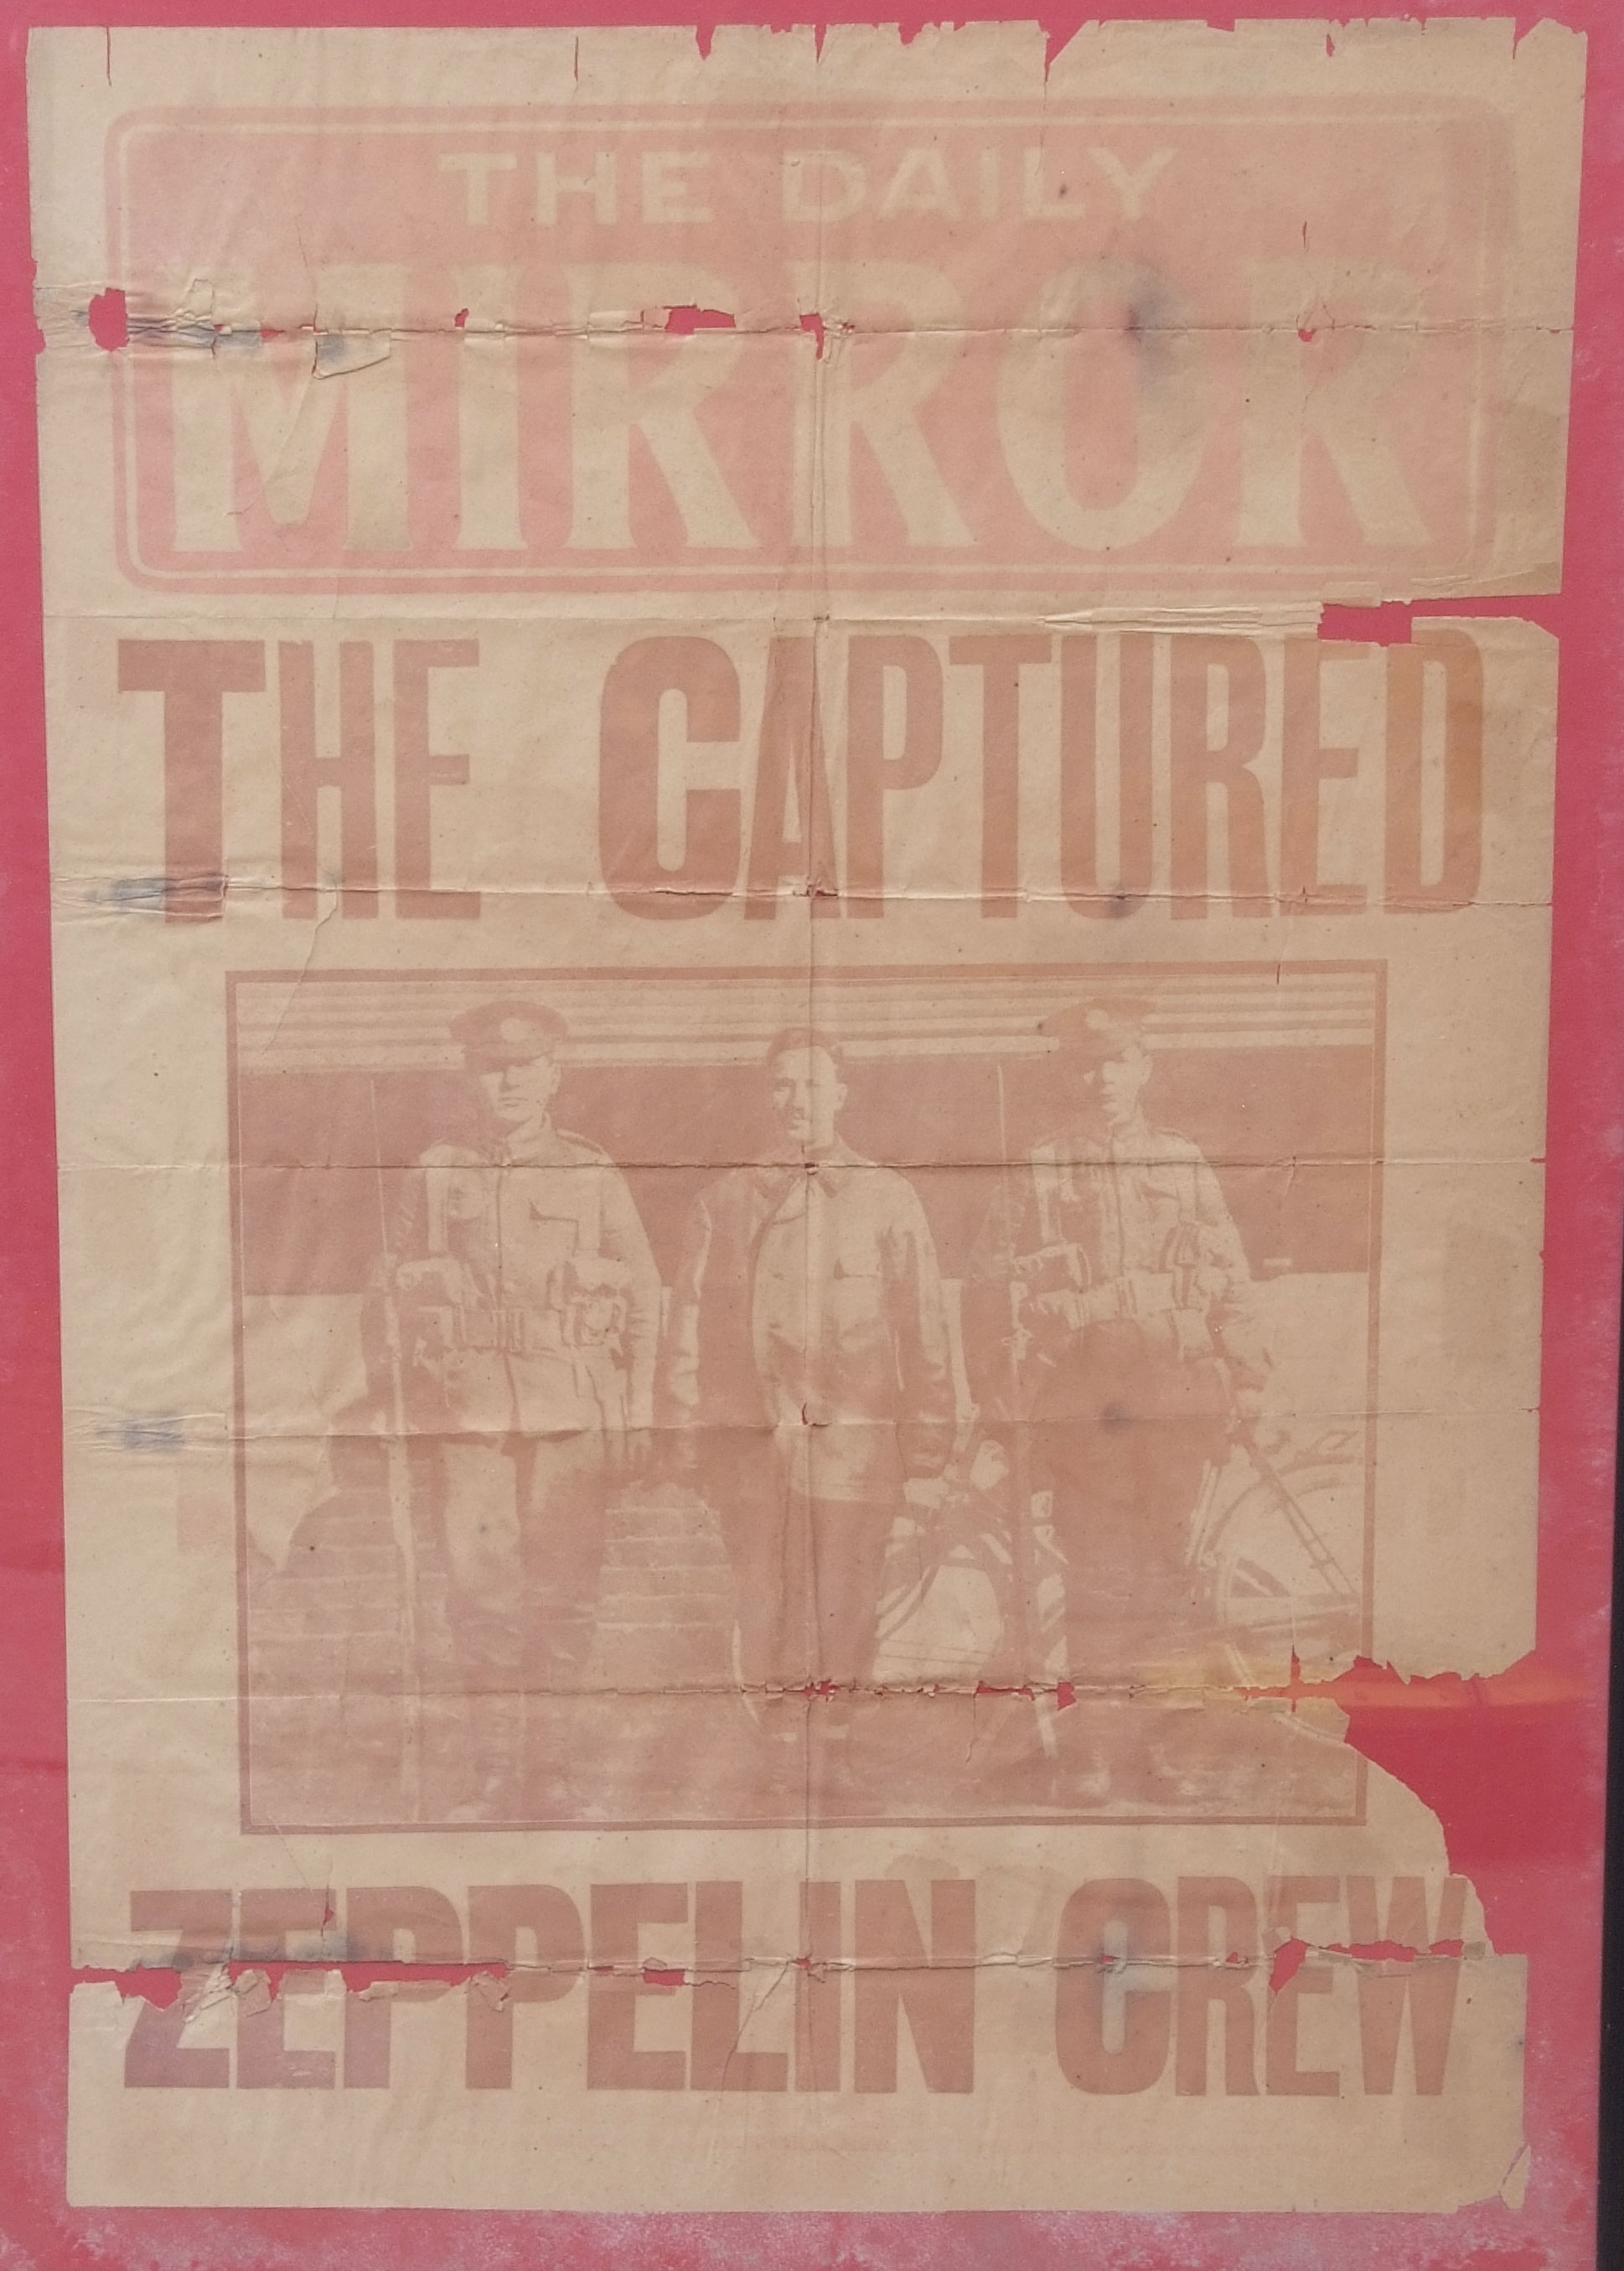 Newspaper billboard The Daily Mirror, the captured Zeppelin crew , frame 33 x 23ins